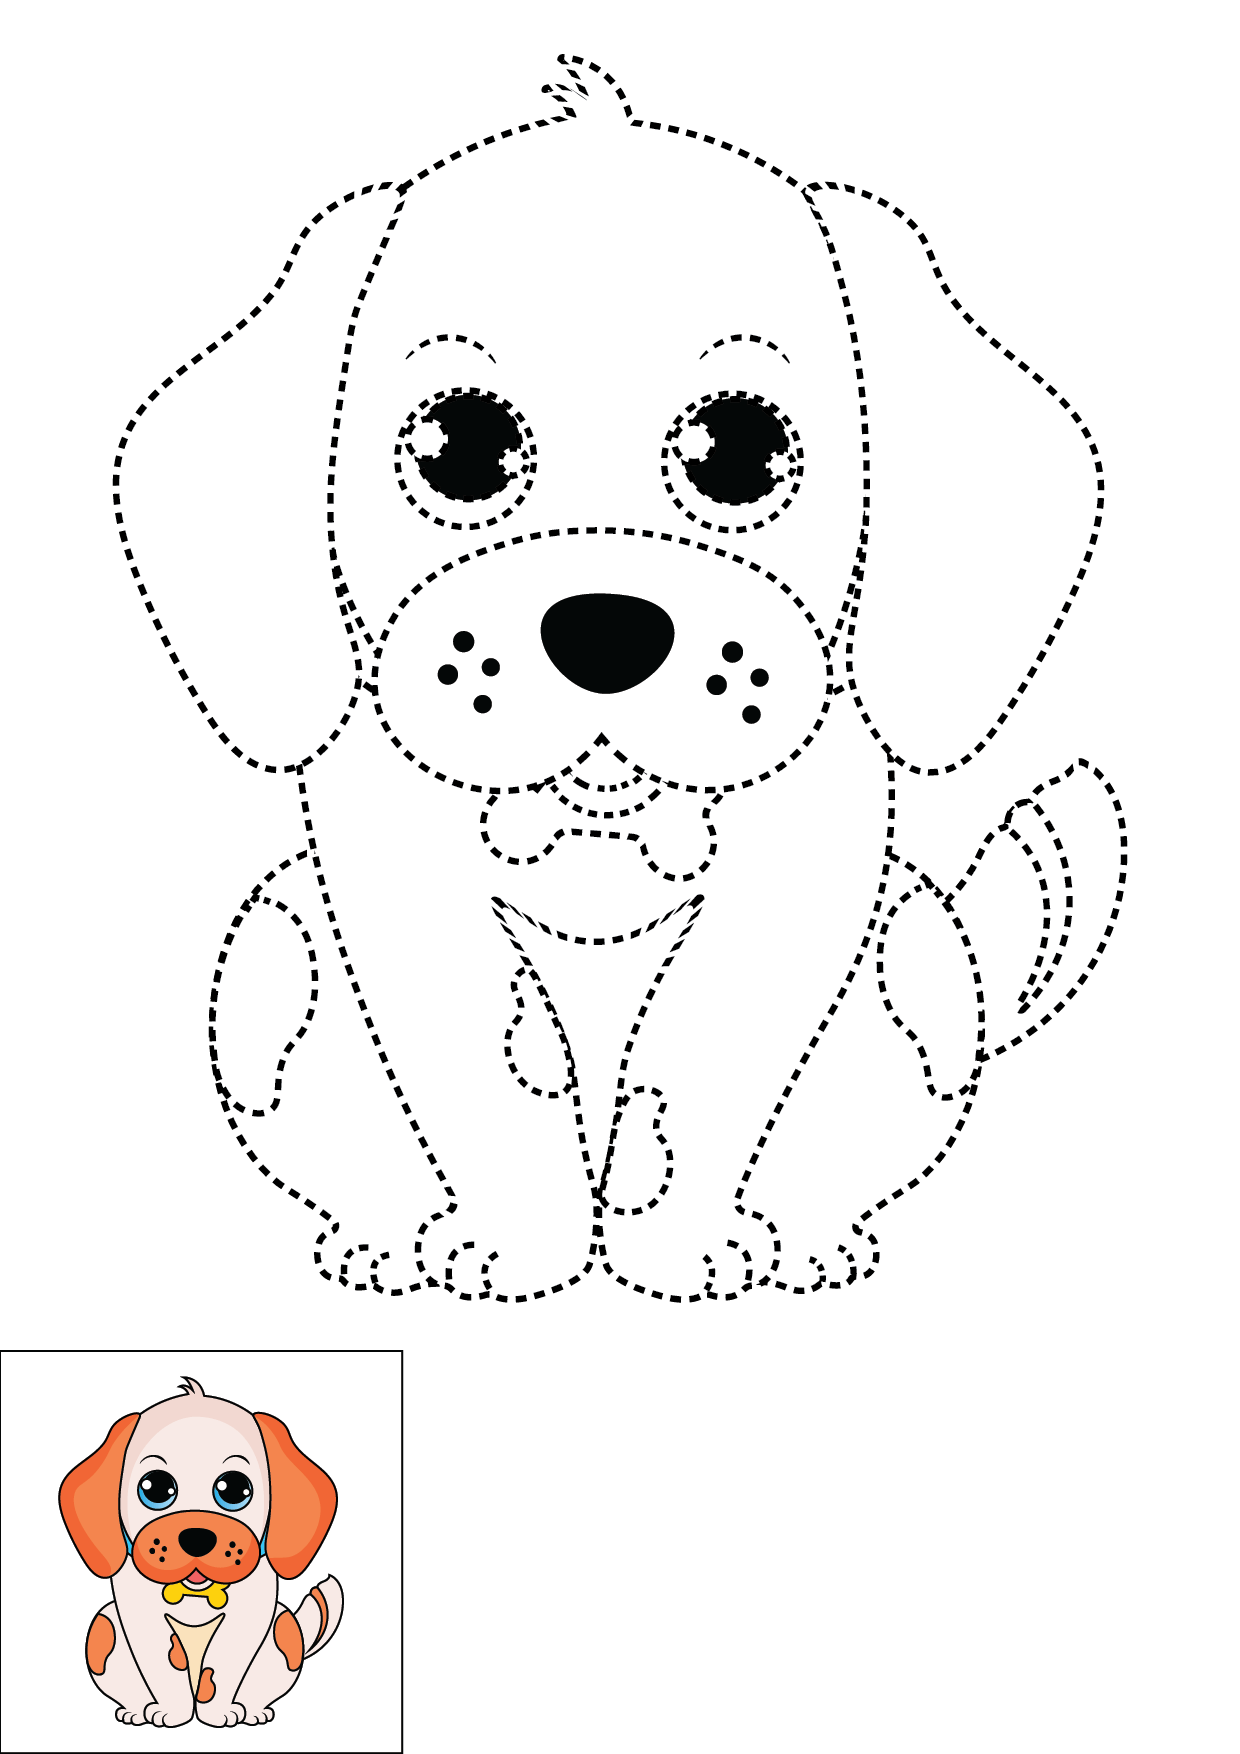 How to Draw A Puppy Light Colored Step by Step Printable Dotted